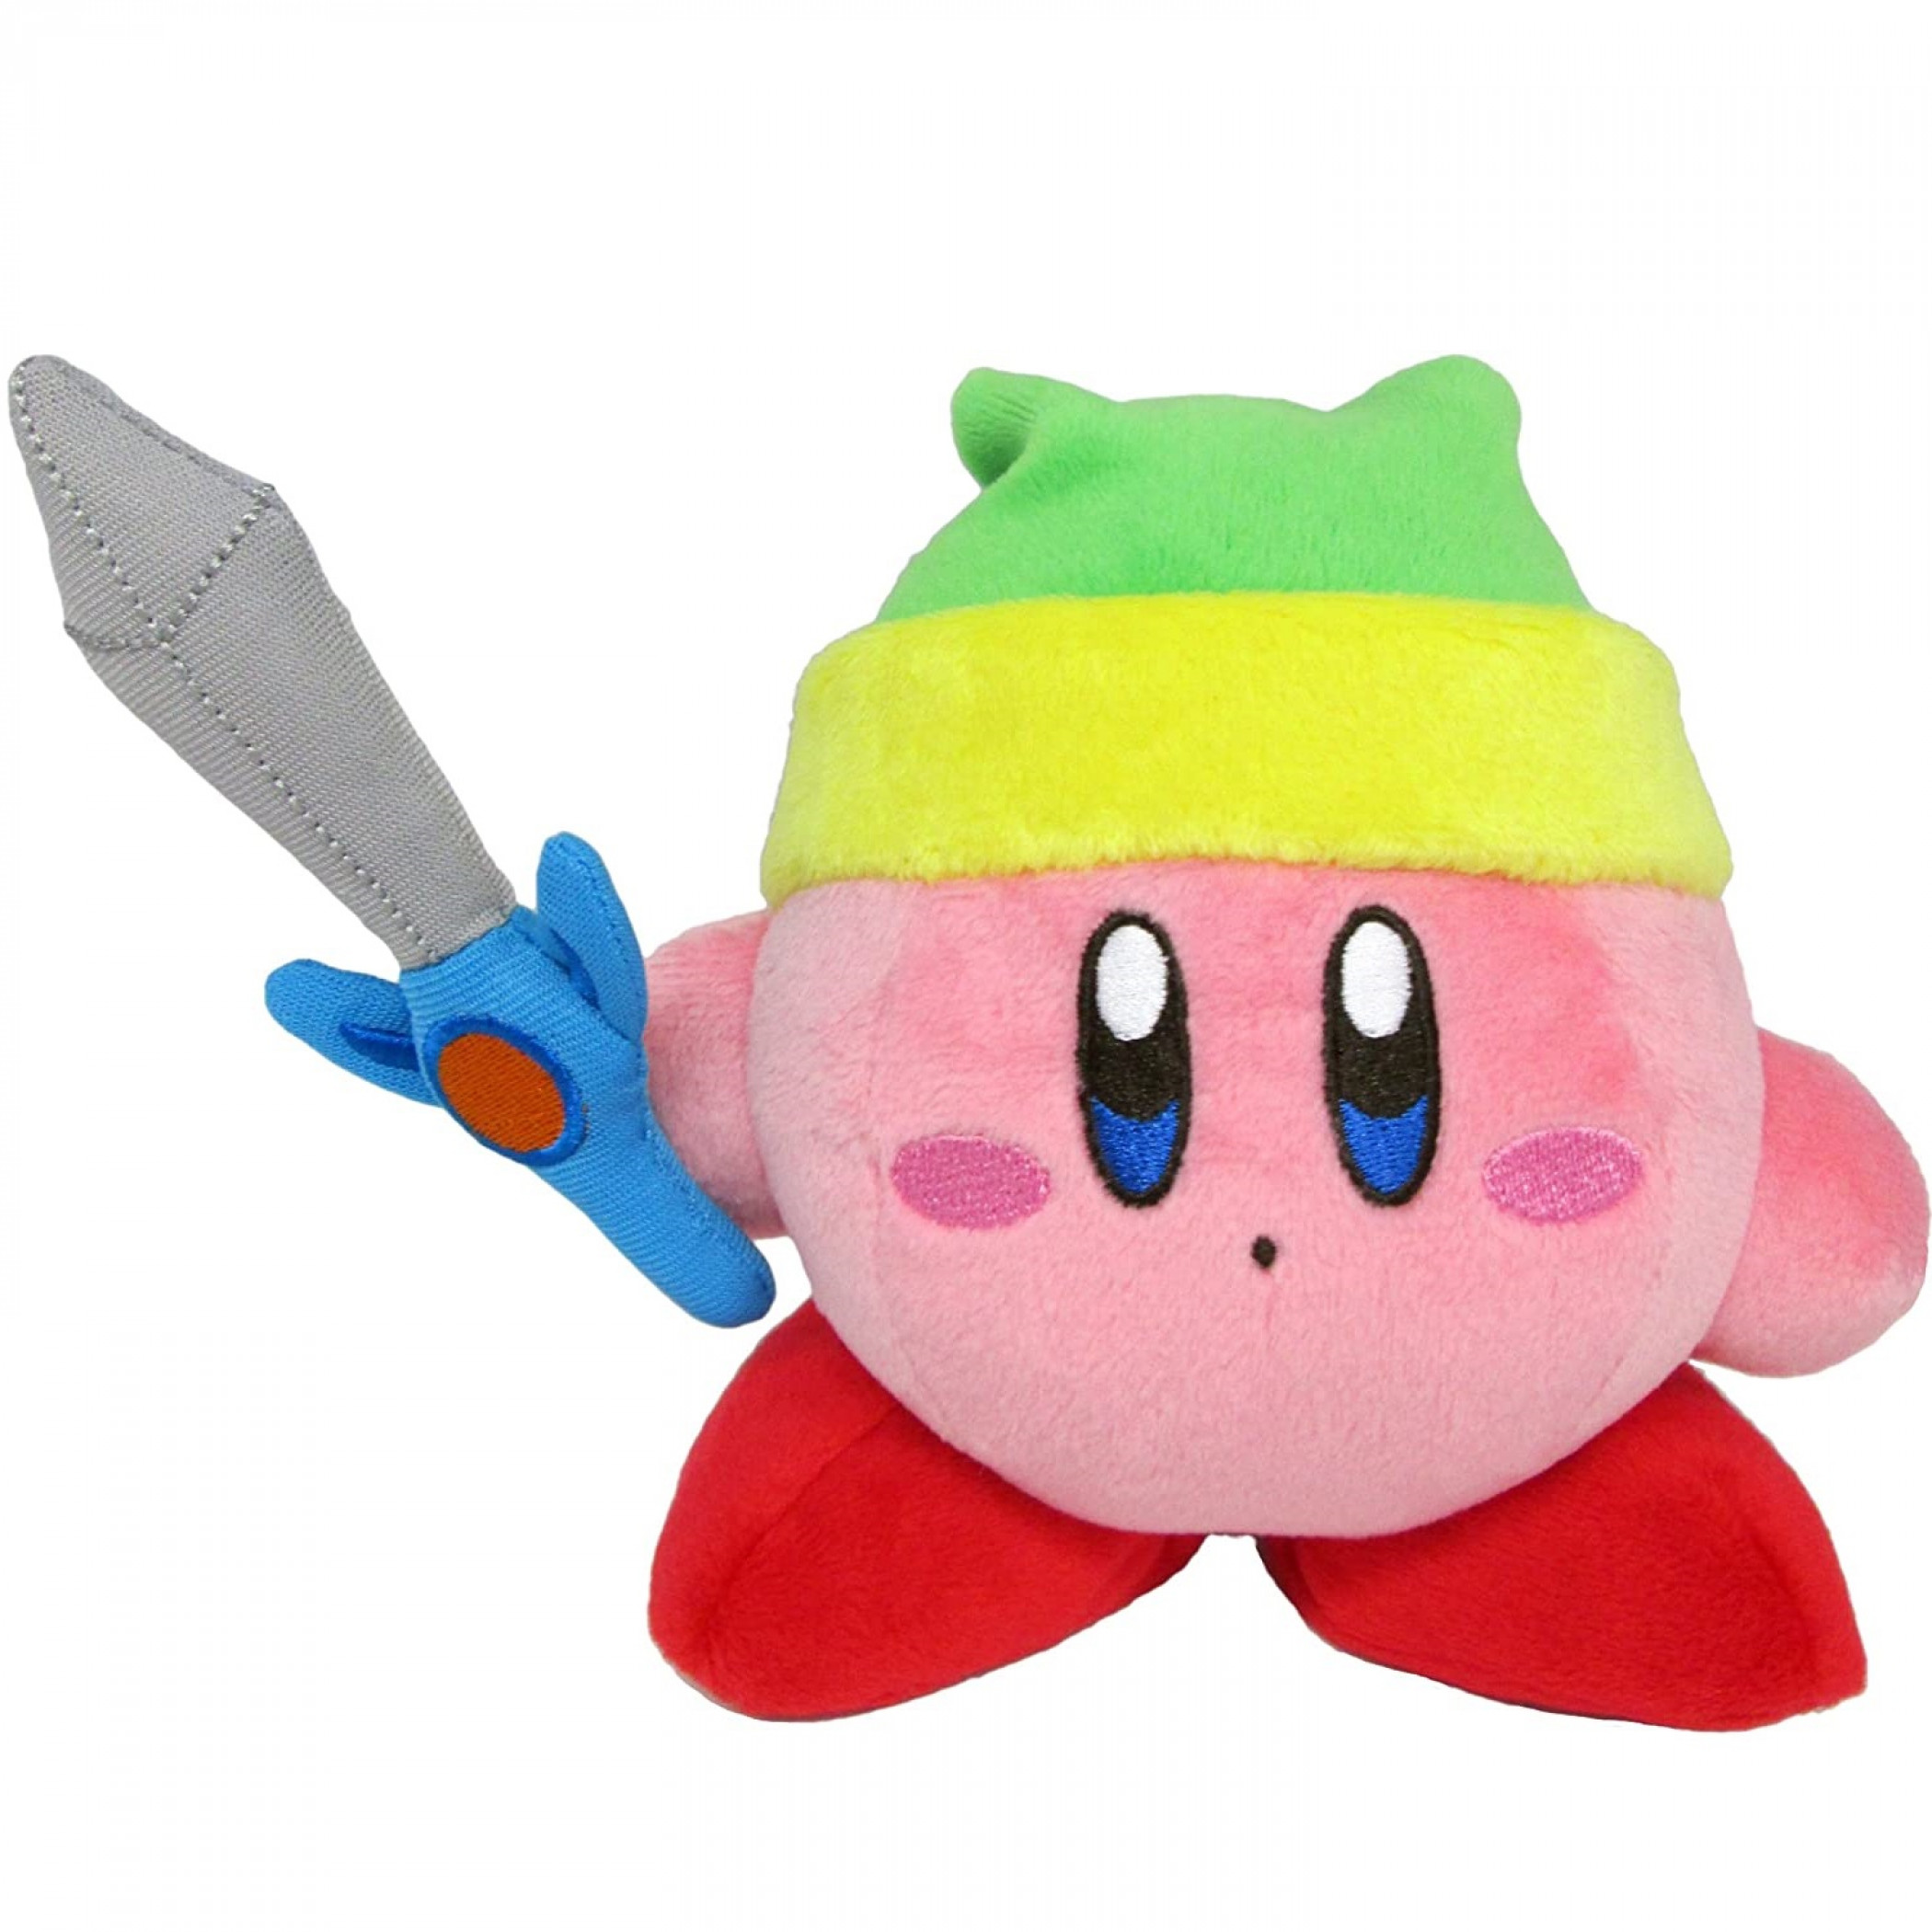 Kirby Link 5" Plush Toy